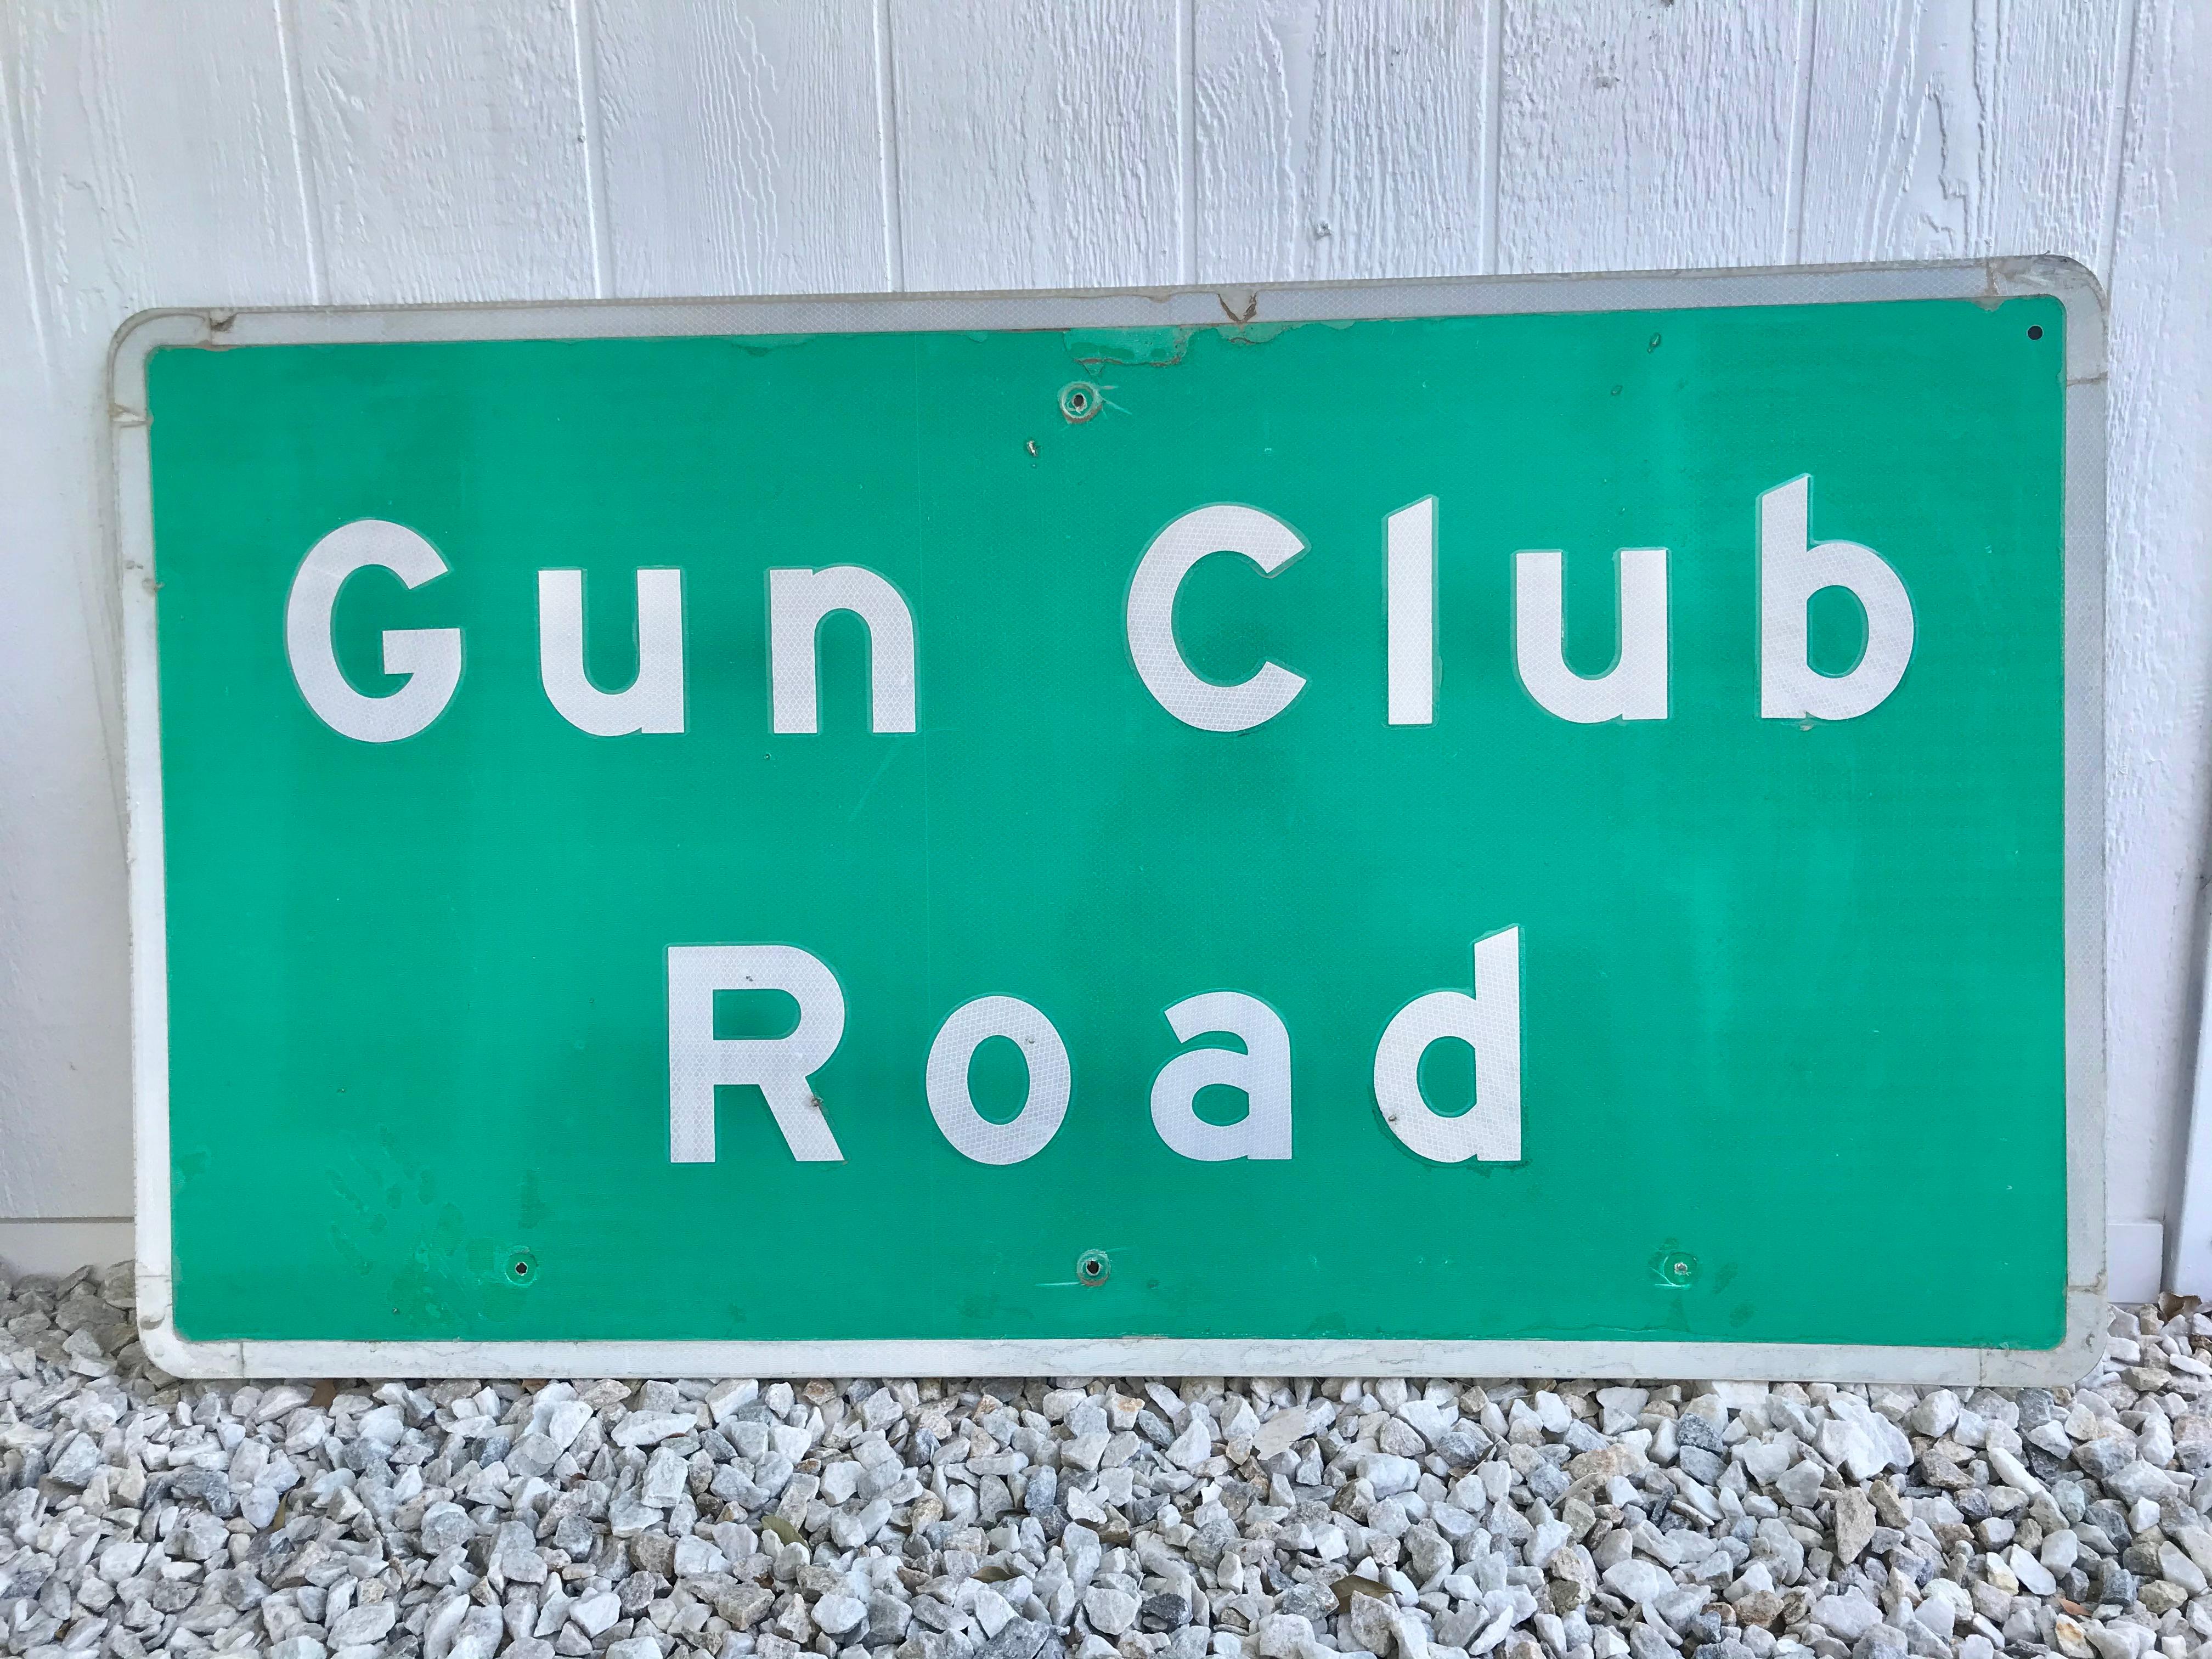 Vintage steel road sign that reads Gun Club Road. Sign was retired from the desert in California, just north of Bakersfield. Green reflective sign with white lettering and trim. Good vintage condition. Some peeling to plastic protective covering.